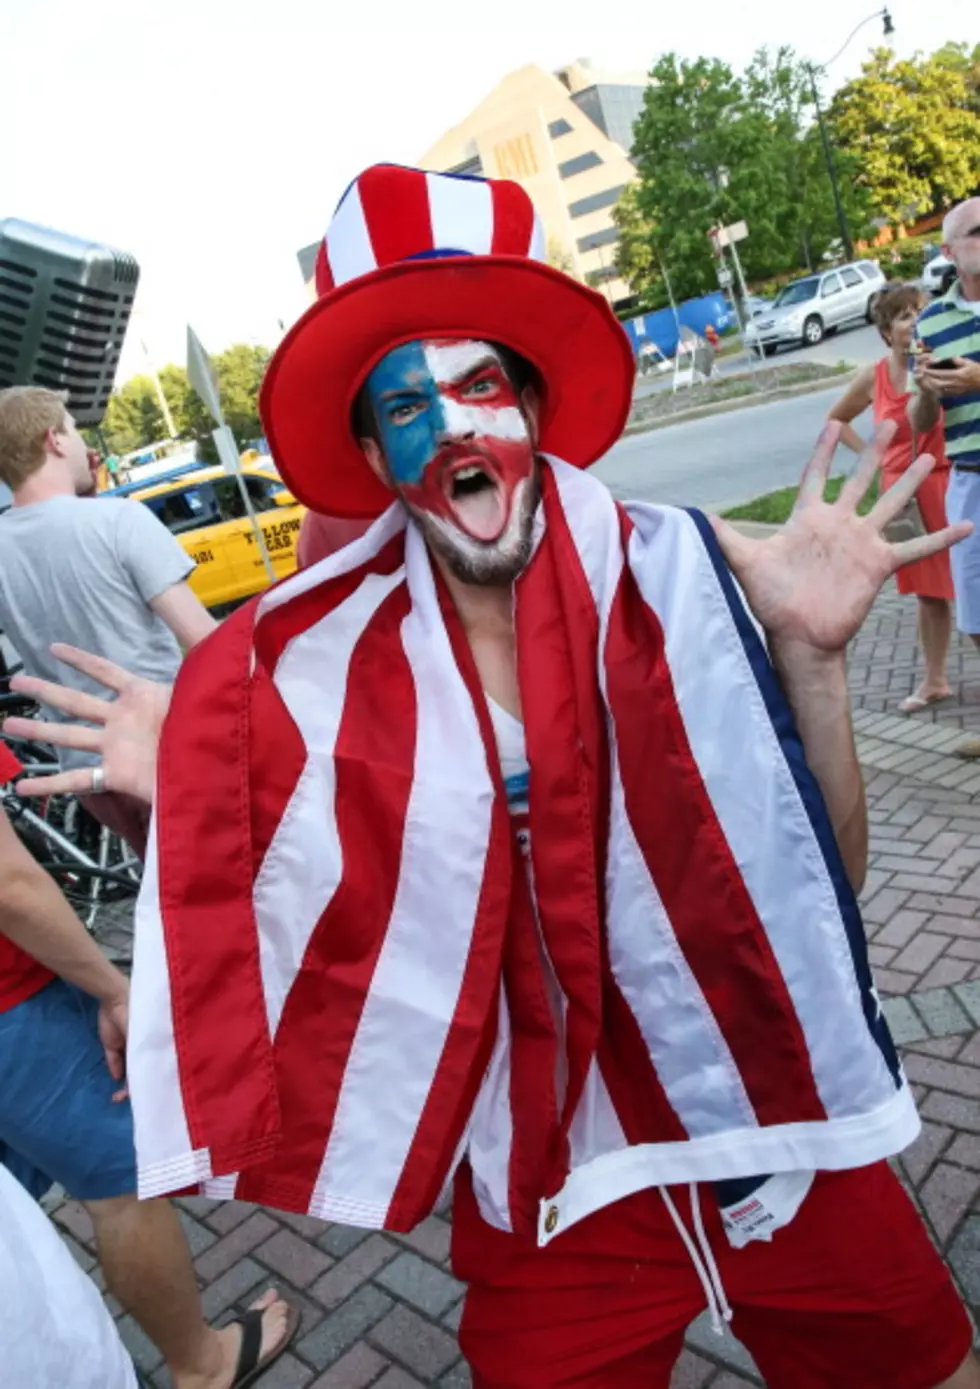 USA Soccer Chant for Victory [VIDEO]